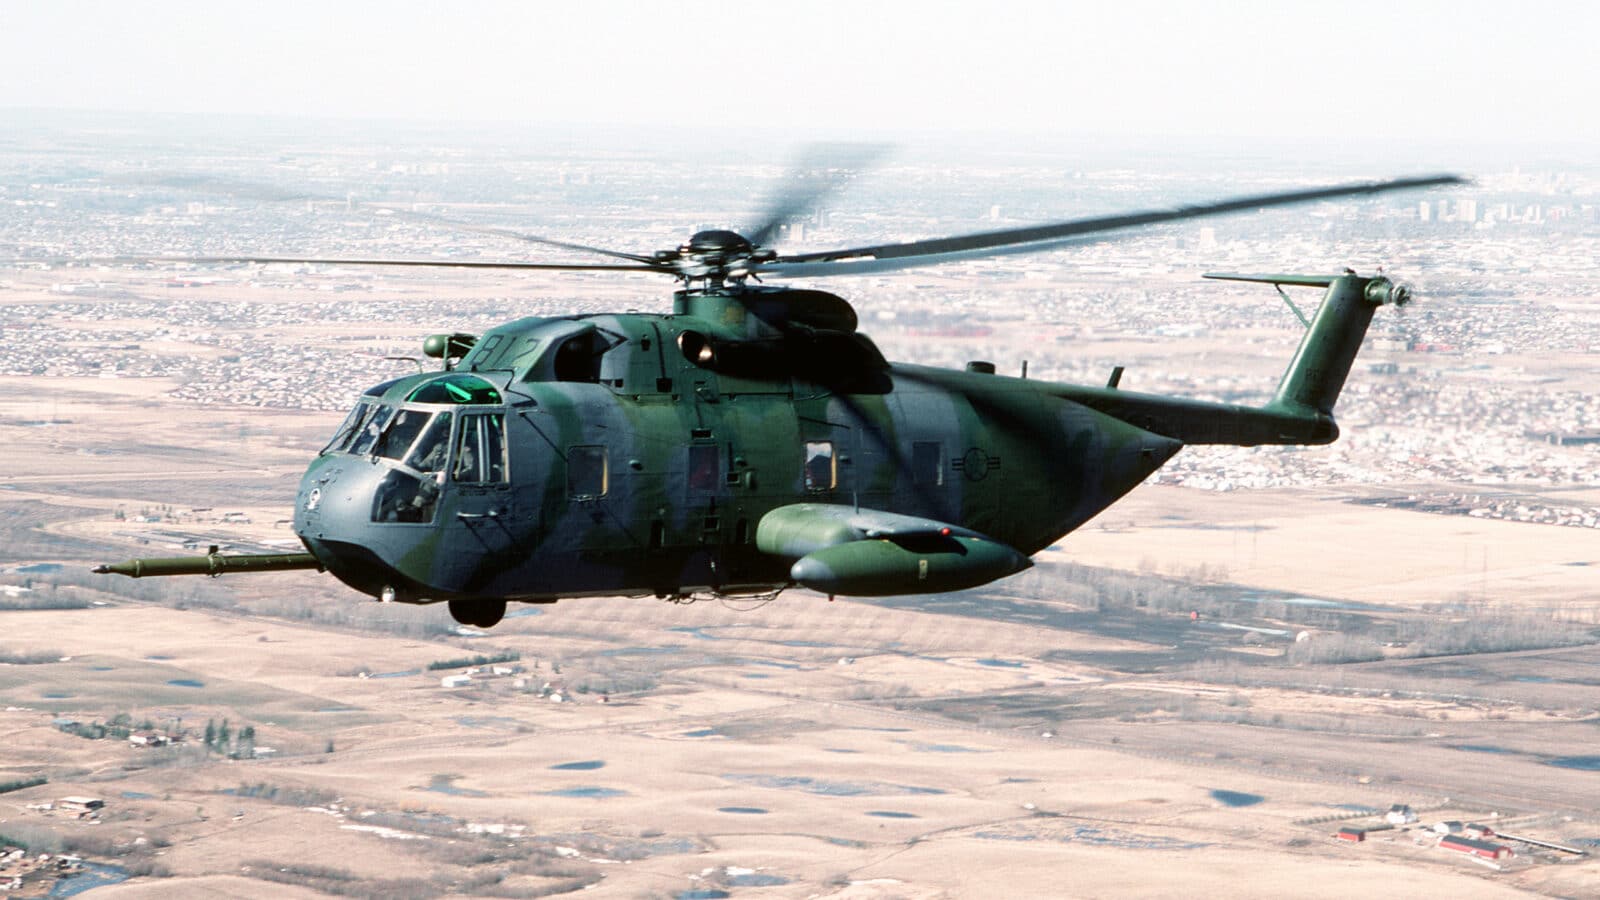 HH-3E Jolly Green Giant: The Big Green Angel | Tactical Americans